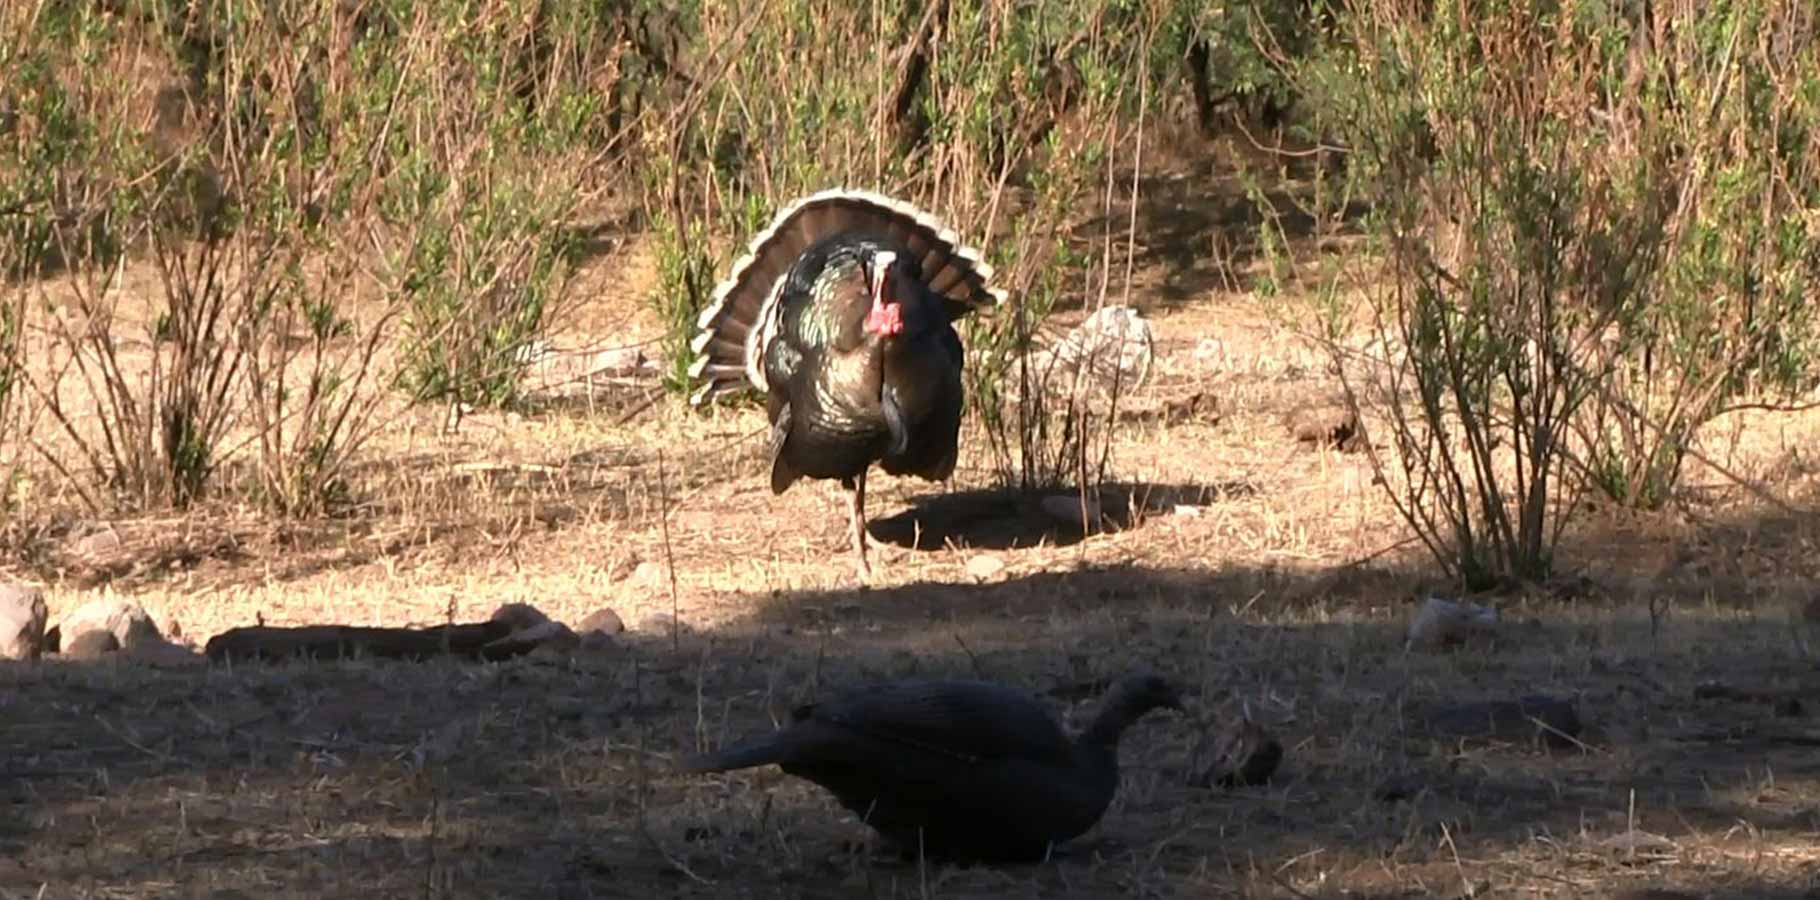 A wild turkey gobble call gets the attention of a turkey during spring turkey hunting season